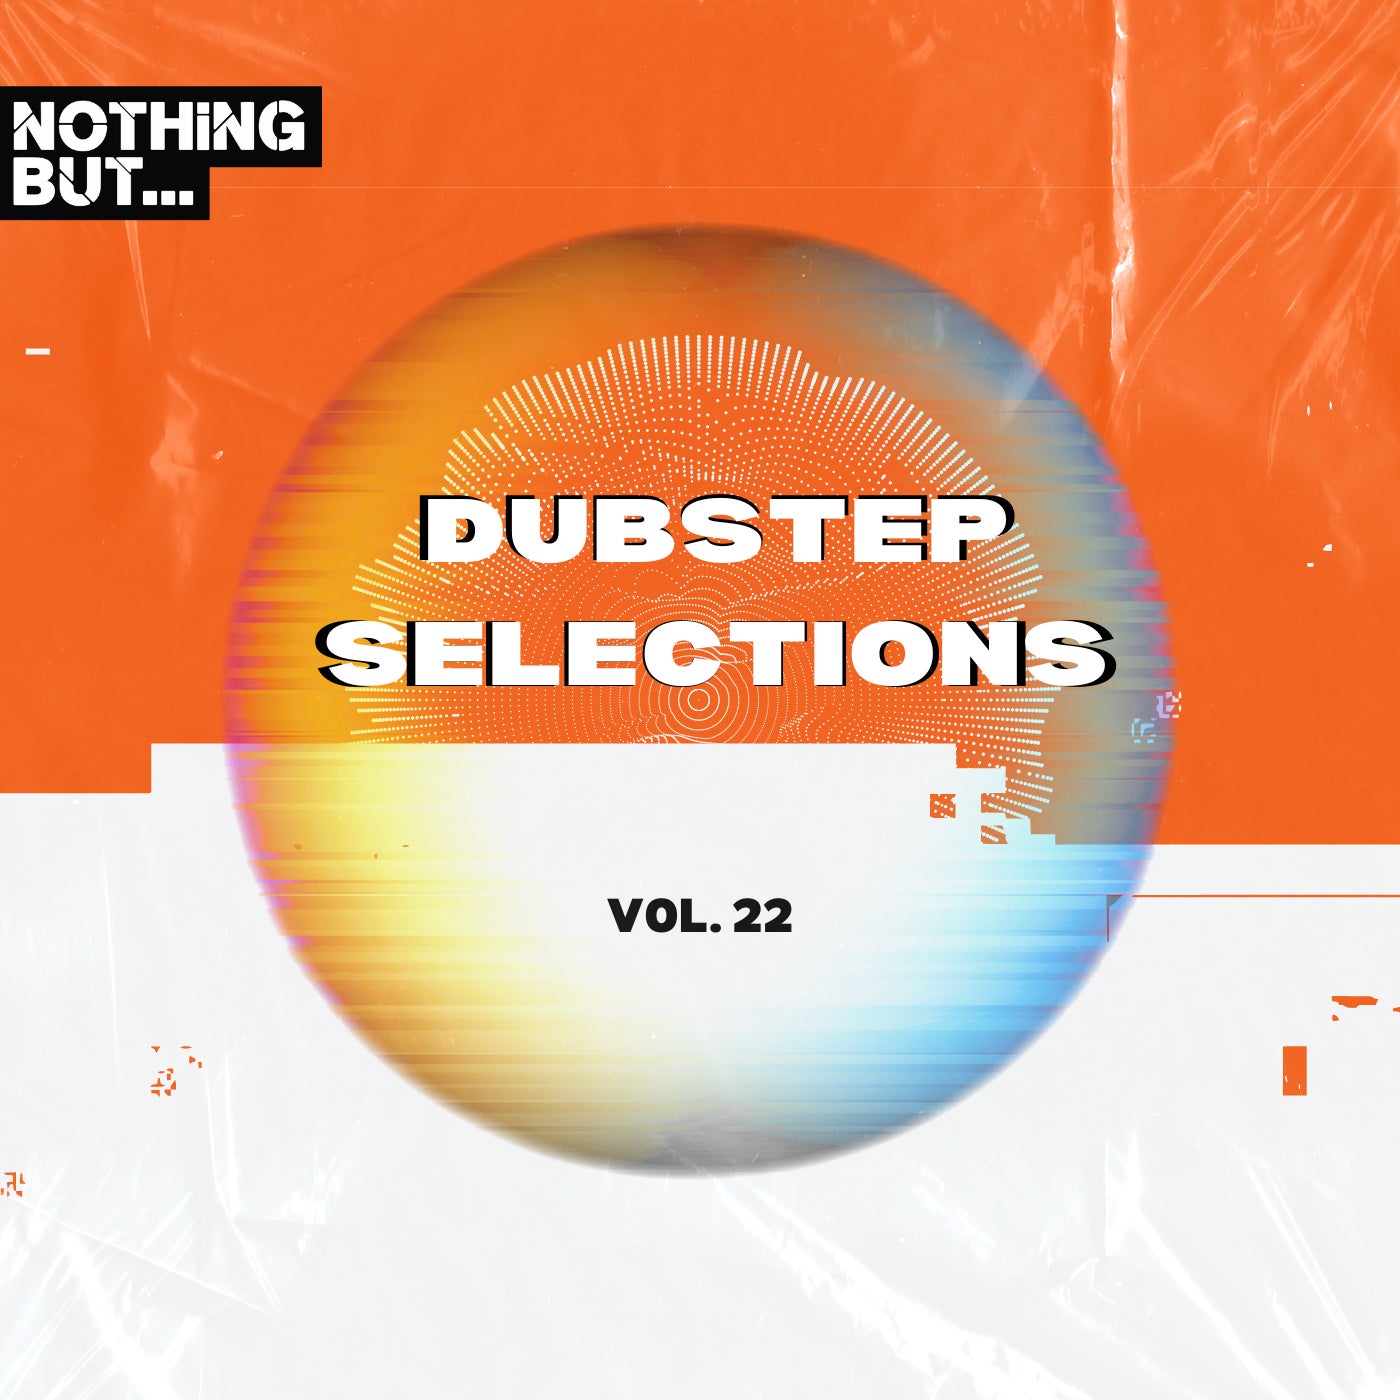 Nothing But... Dubstep Selections, Vol. 22